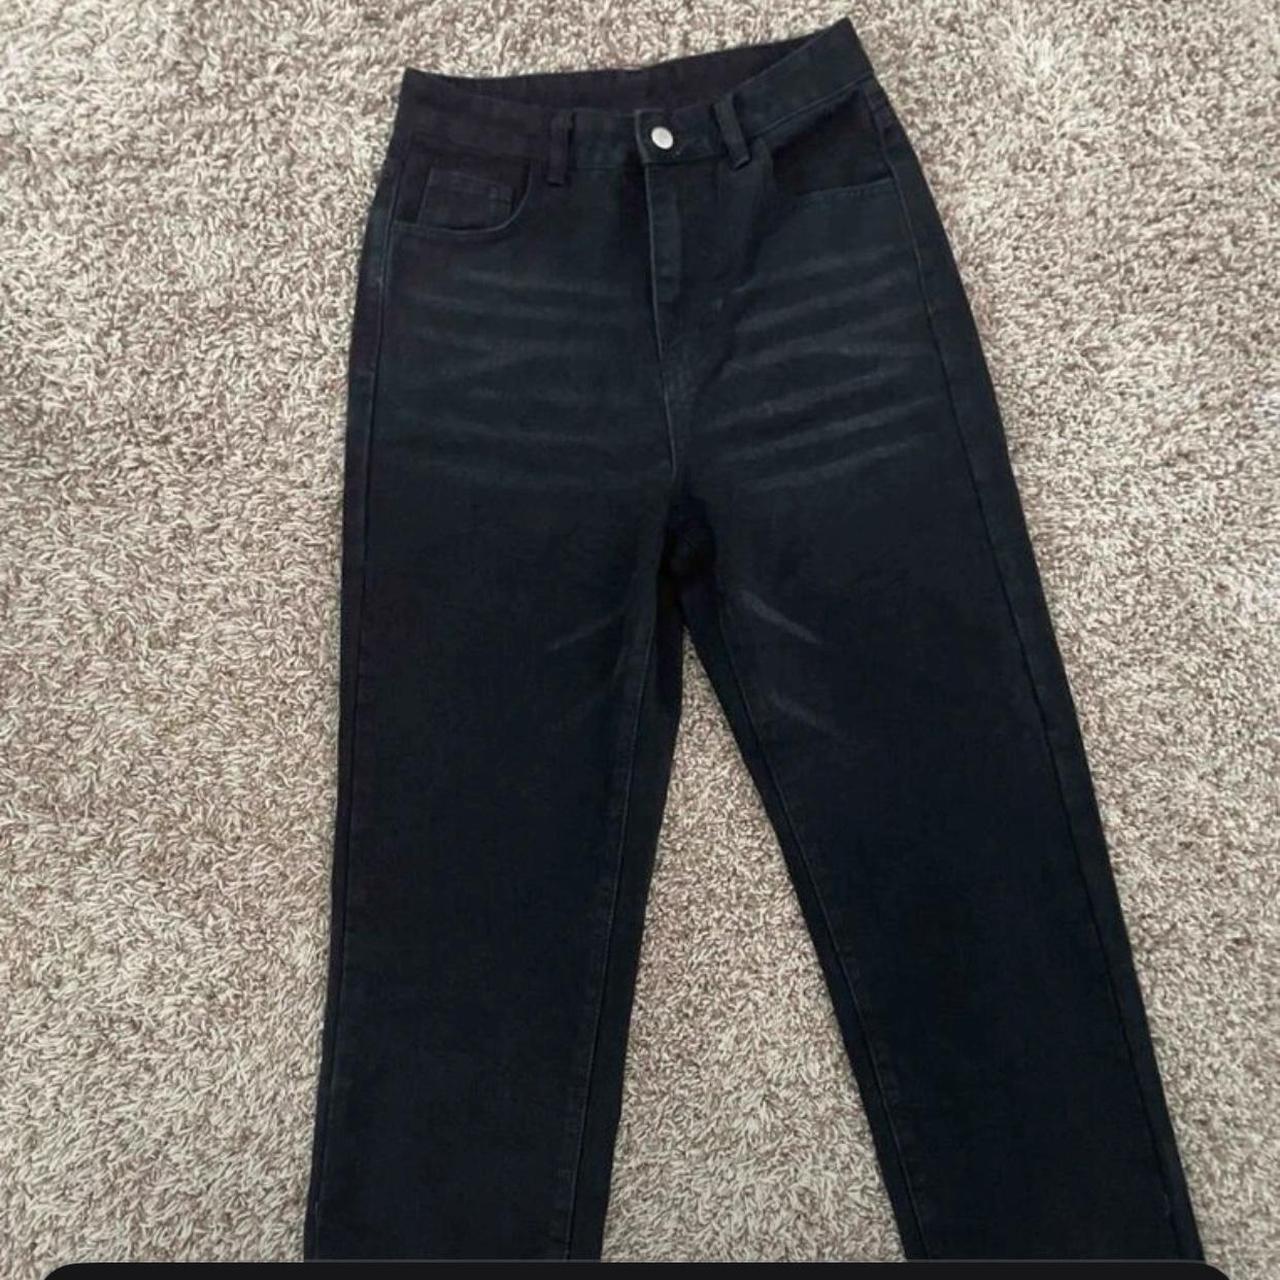 Black baggy jeans Accepting offers |... - Depop